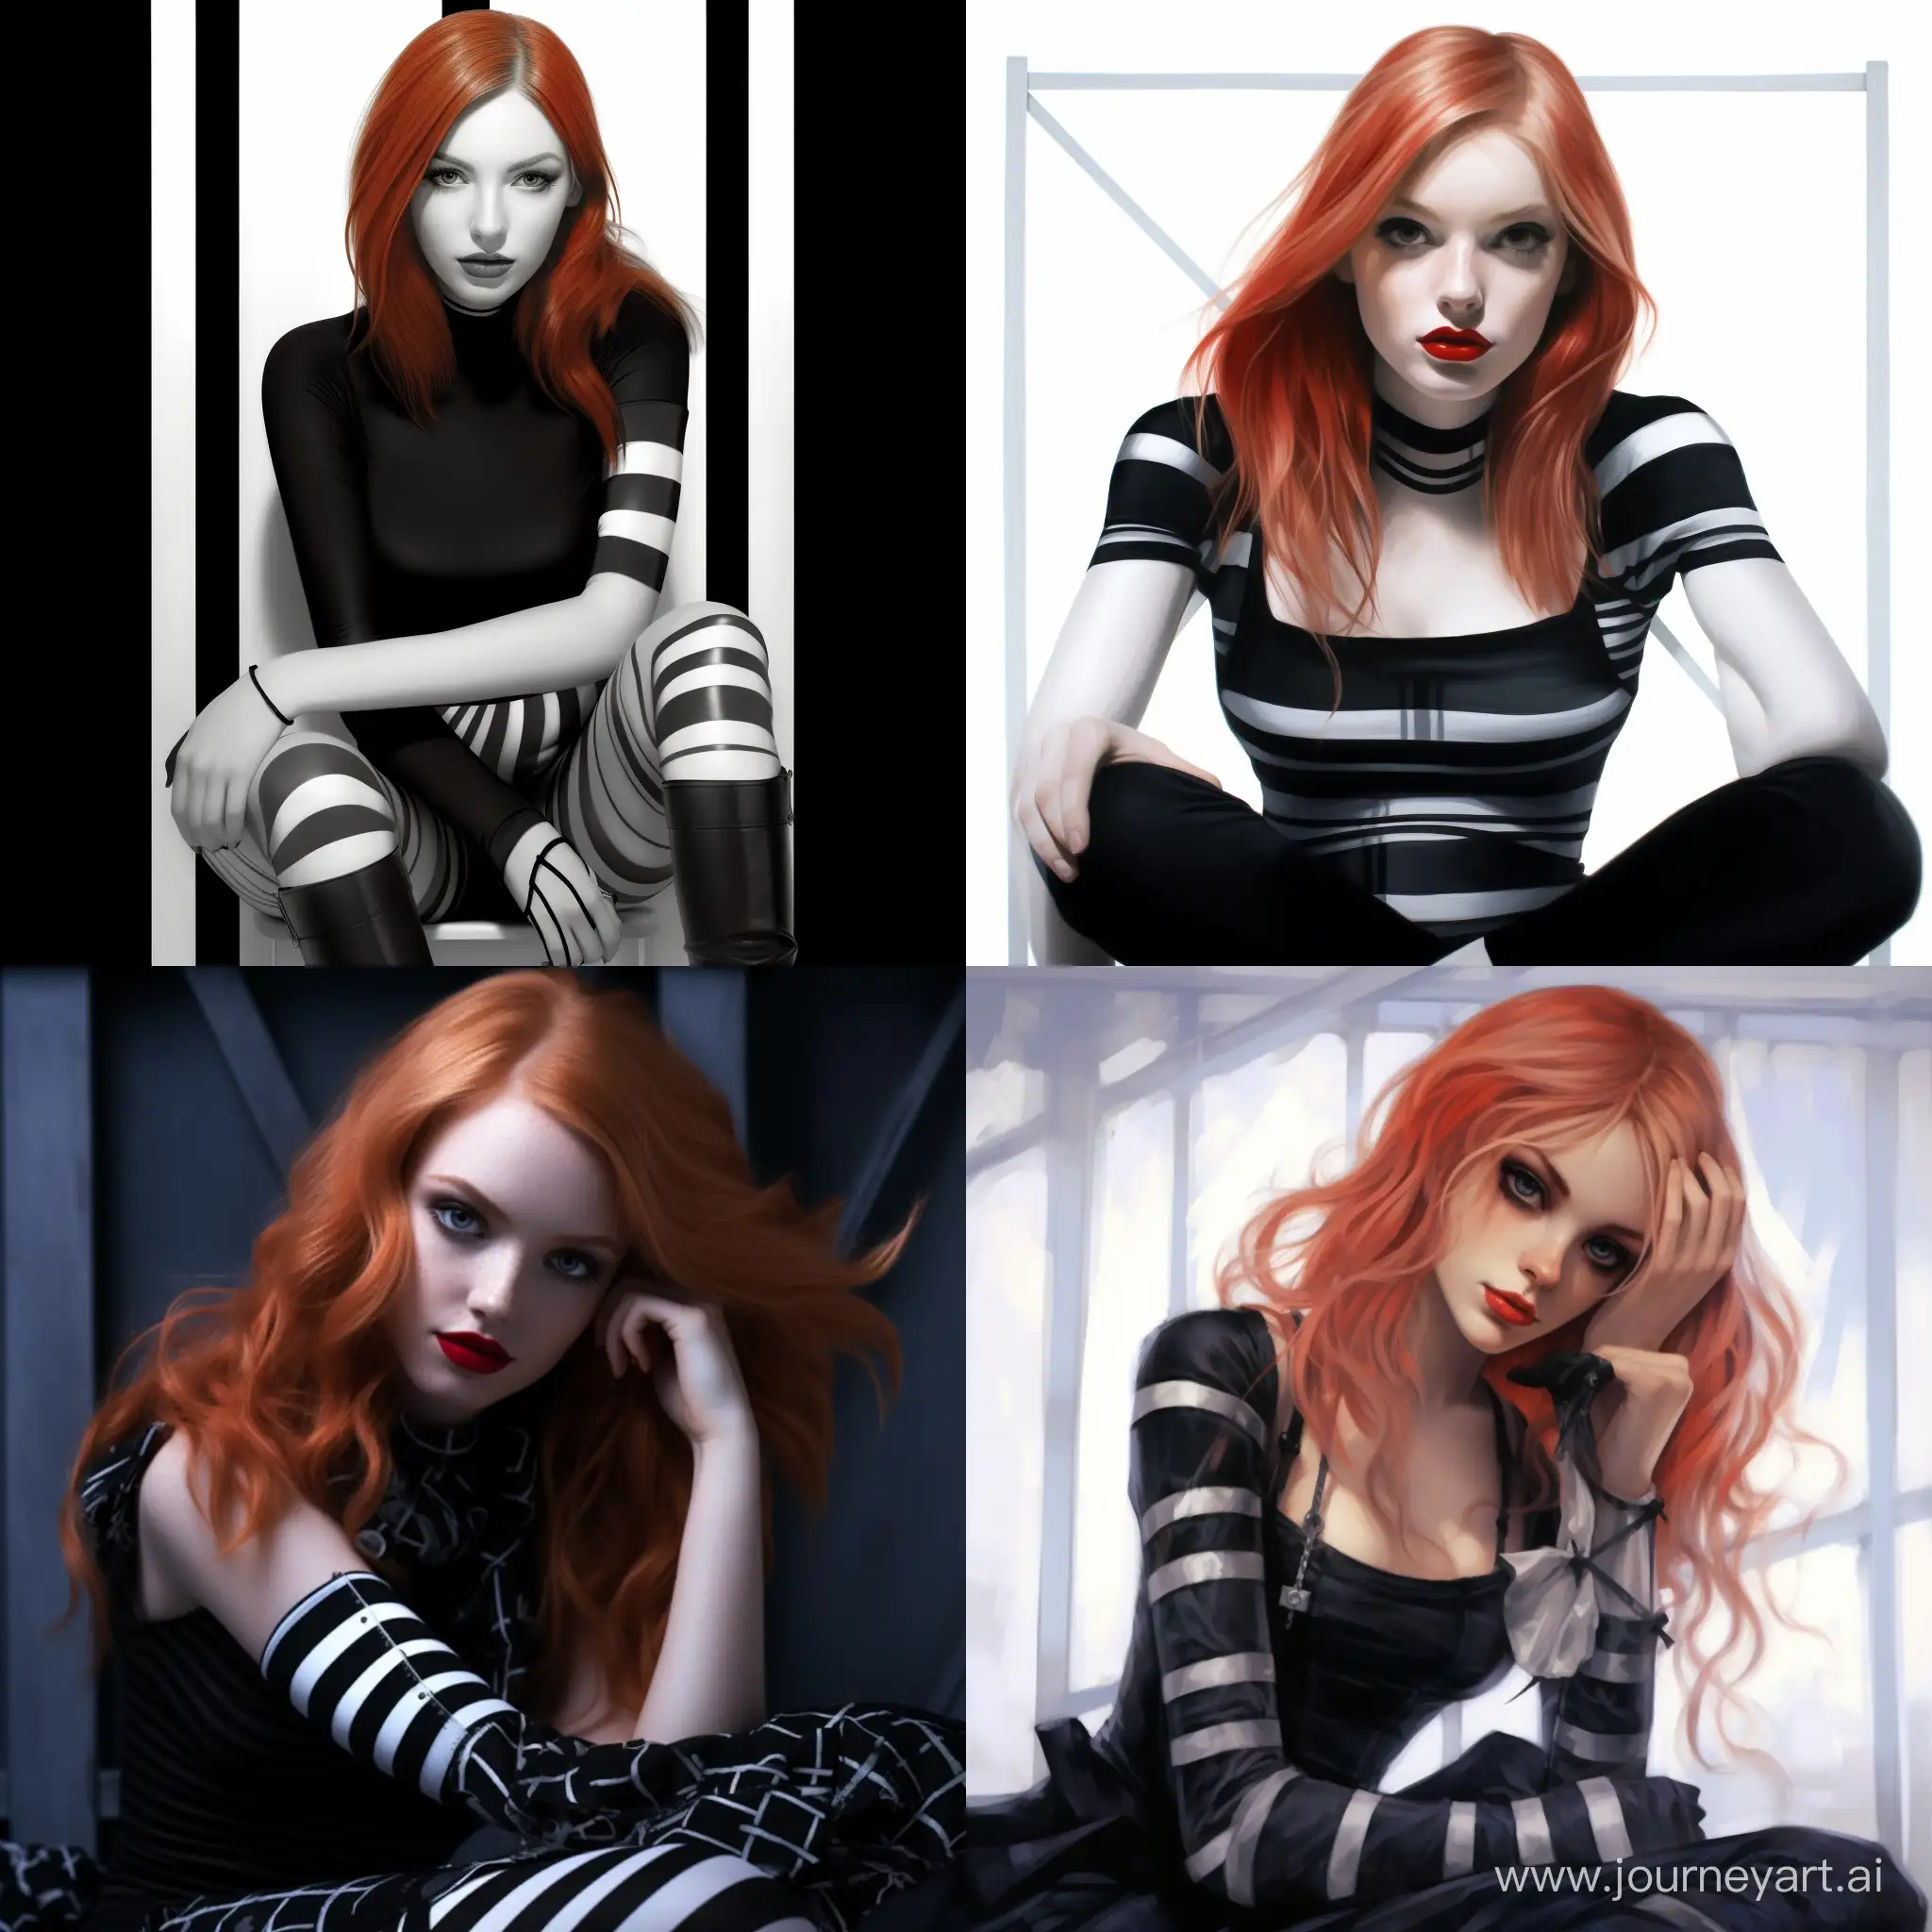 Stylish-Blonde-and-RedHaired-Girls-in-Fashionable-Monochrome-Ensemble